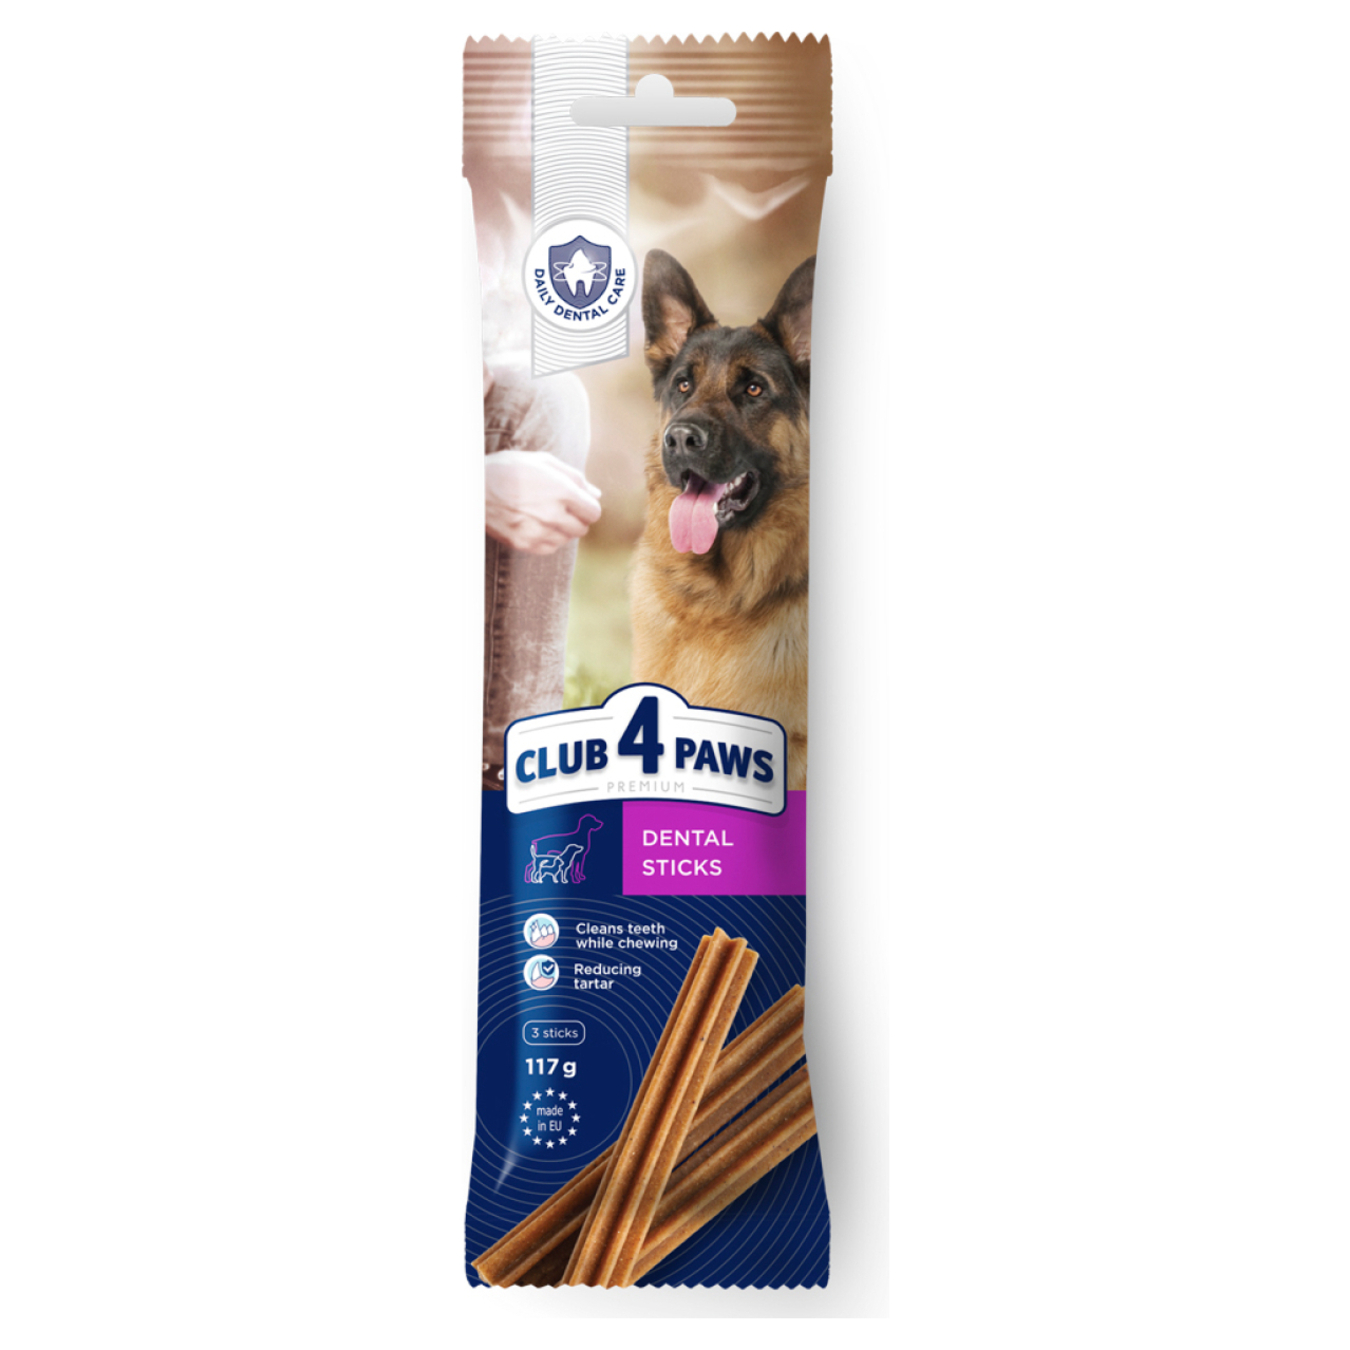 Club 4 Paws Chewing stick for adult dogs Premium dental sticks 117g